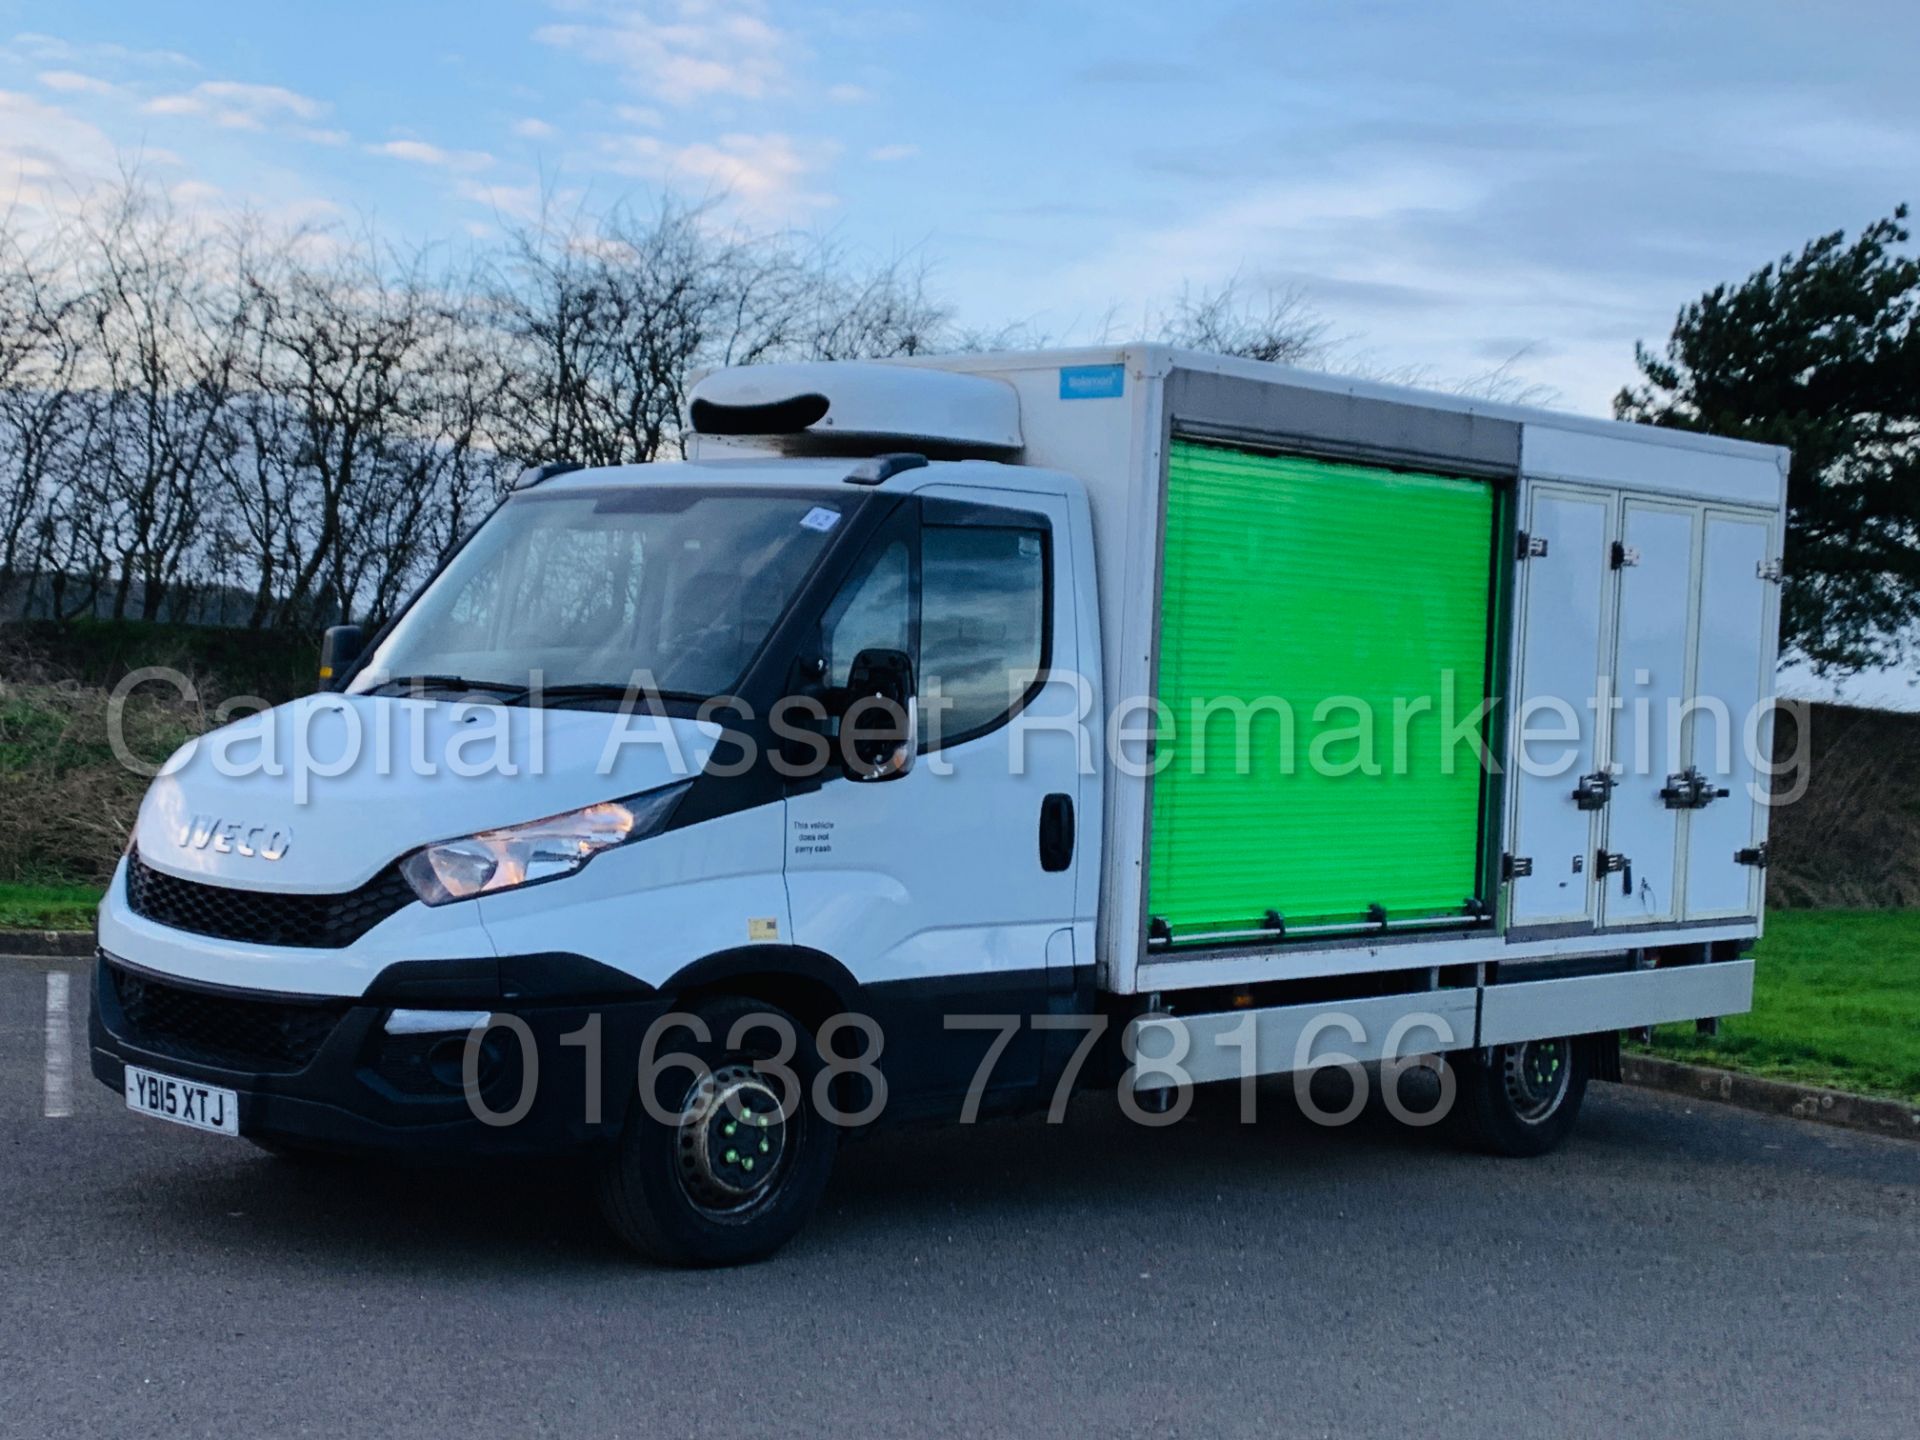 (On Sale) IVECO DAILY 35S11 *LWB - REFRIGERATED BOX* (2015 - NEW MODEL) '2.3 DIESEL - 8 SPEED AUTO' - Image 7 of 39